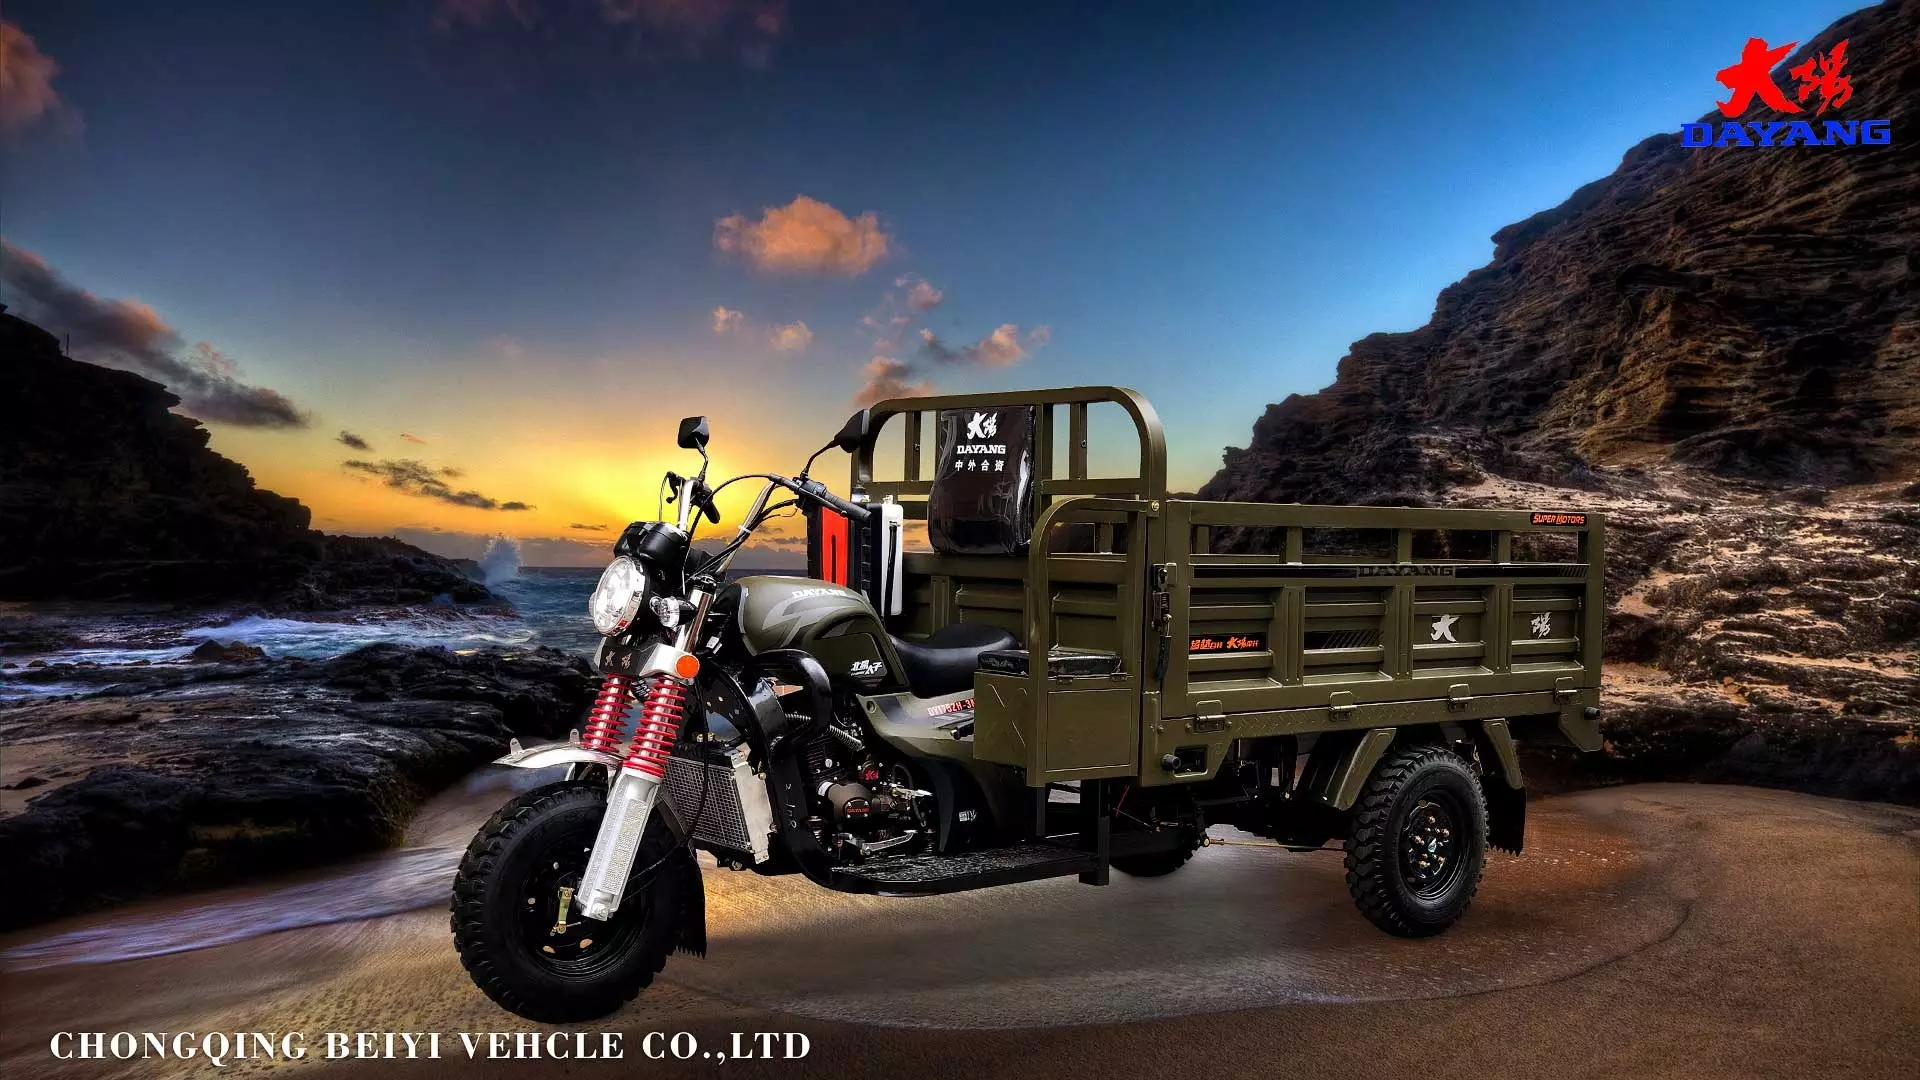 Hot selling adults latest gasoline 3 wheel motorcycles cargo tricycle delivery motors corporation 200 cc